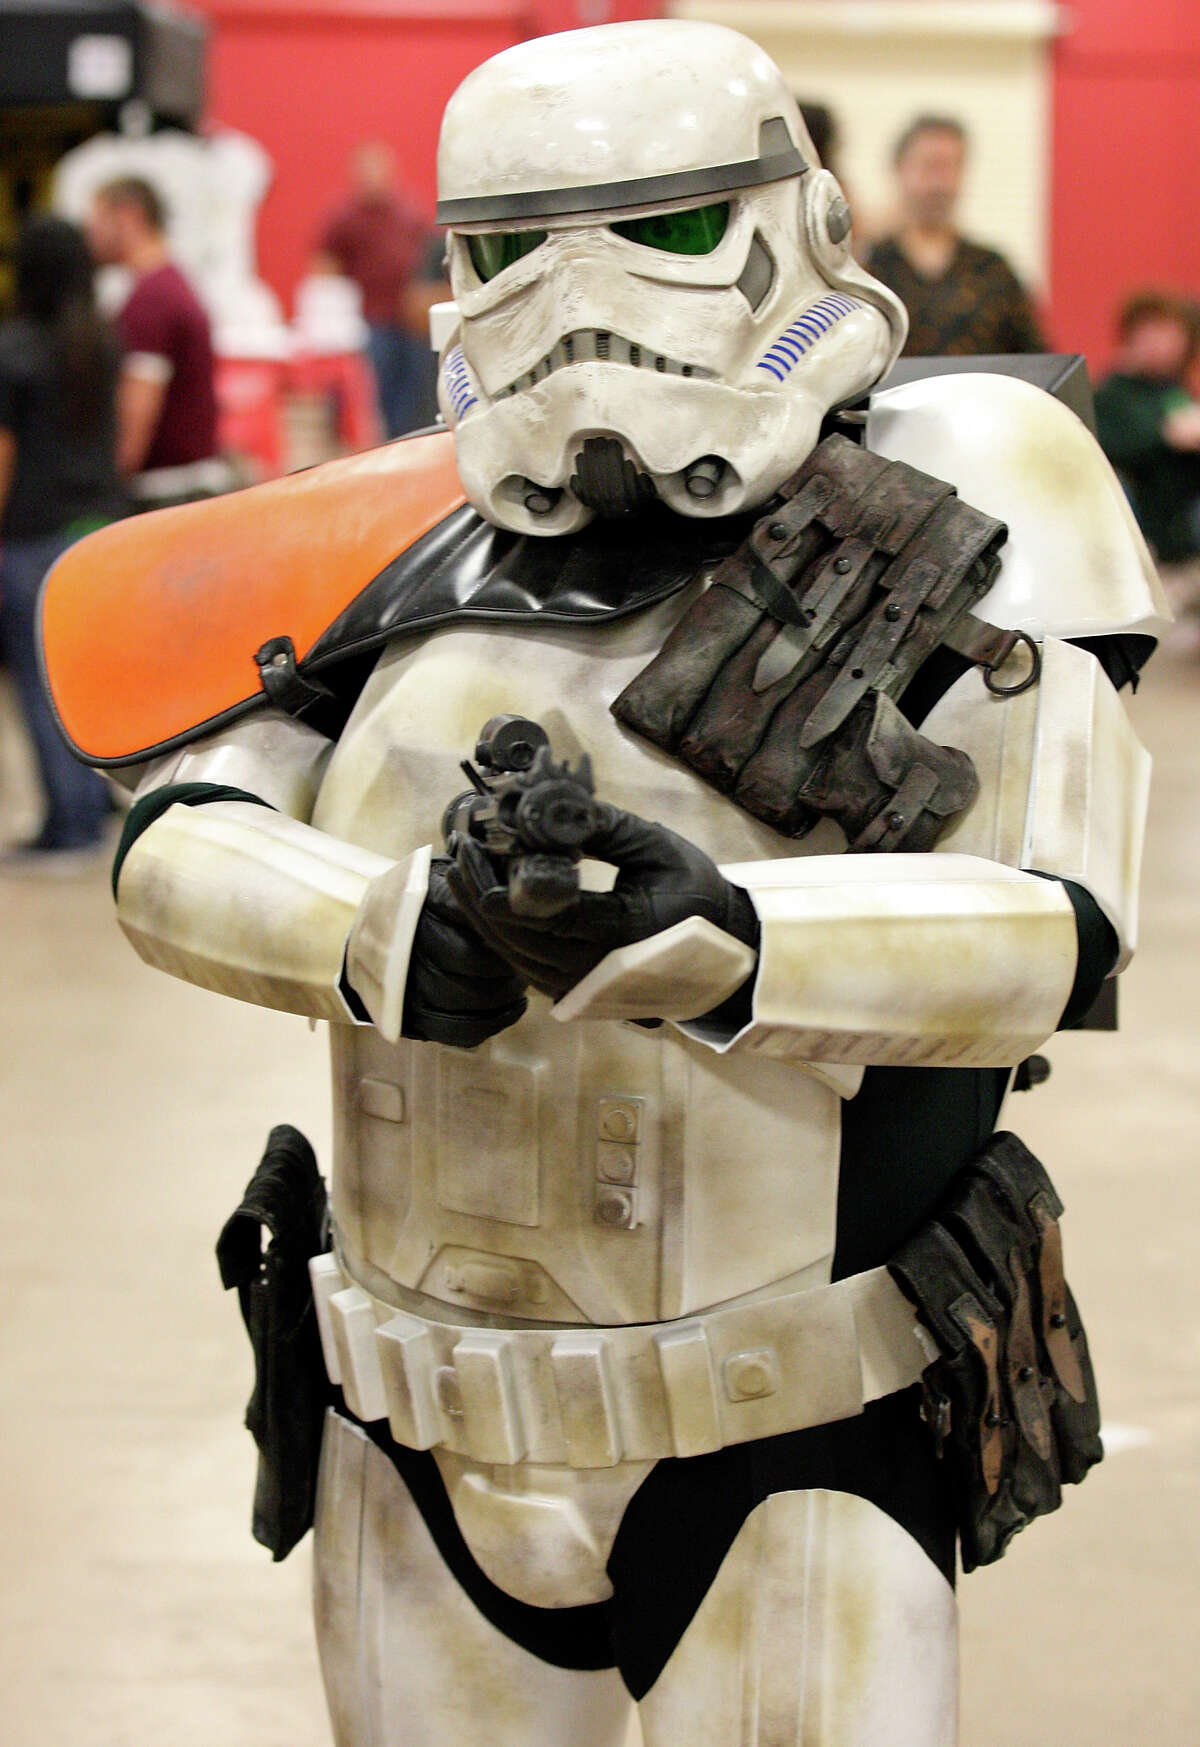 FOR METRO - John Laurel, 40, as a Sandtrooper, poses for a photo during the Texas Comicon 2011 Sunday June 26, 2011 at the San Antonio Event Center. (PHOTO BY EDWARD A. ORNELAS/eaornelas@express-news.net)